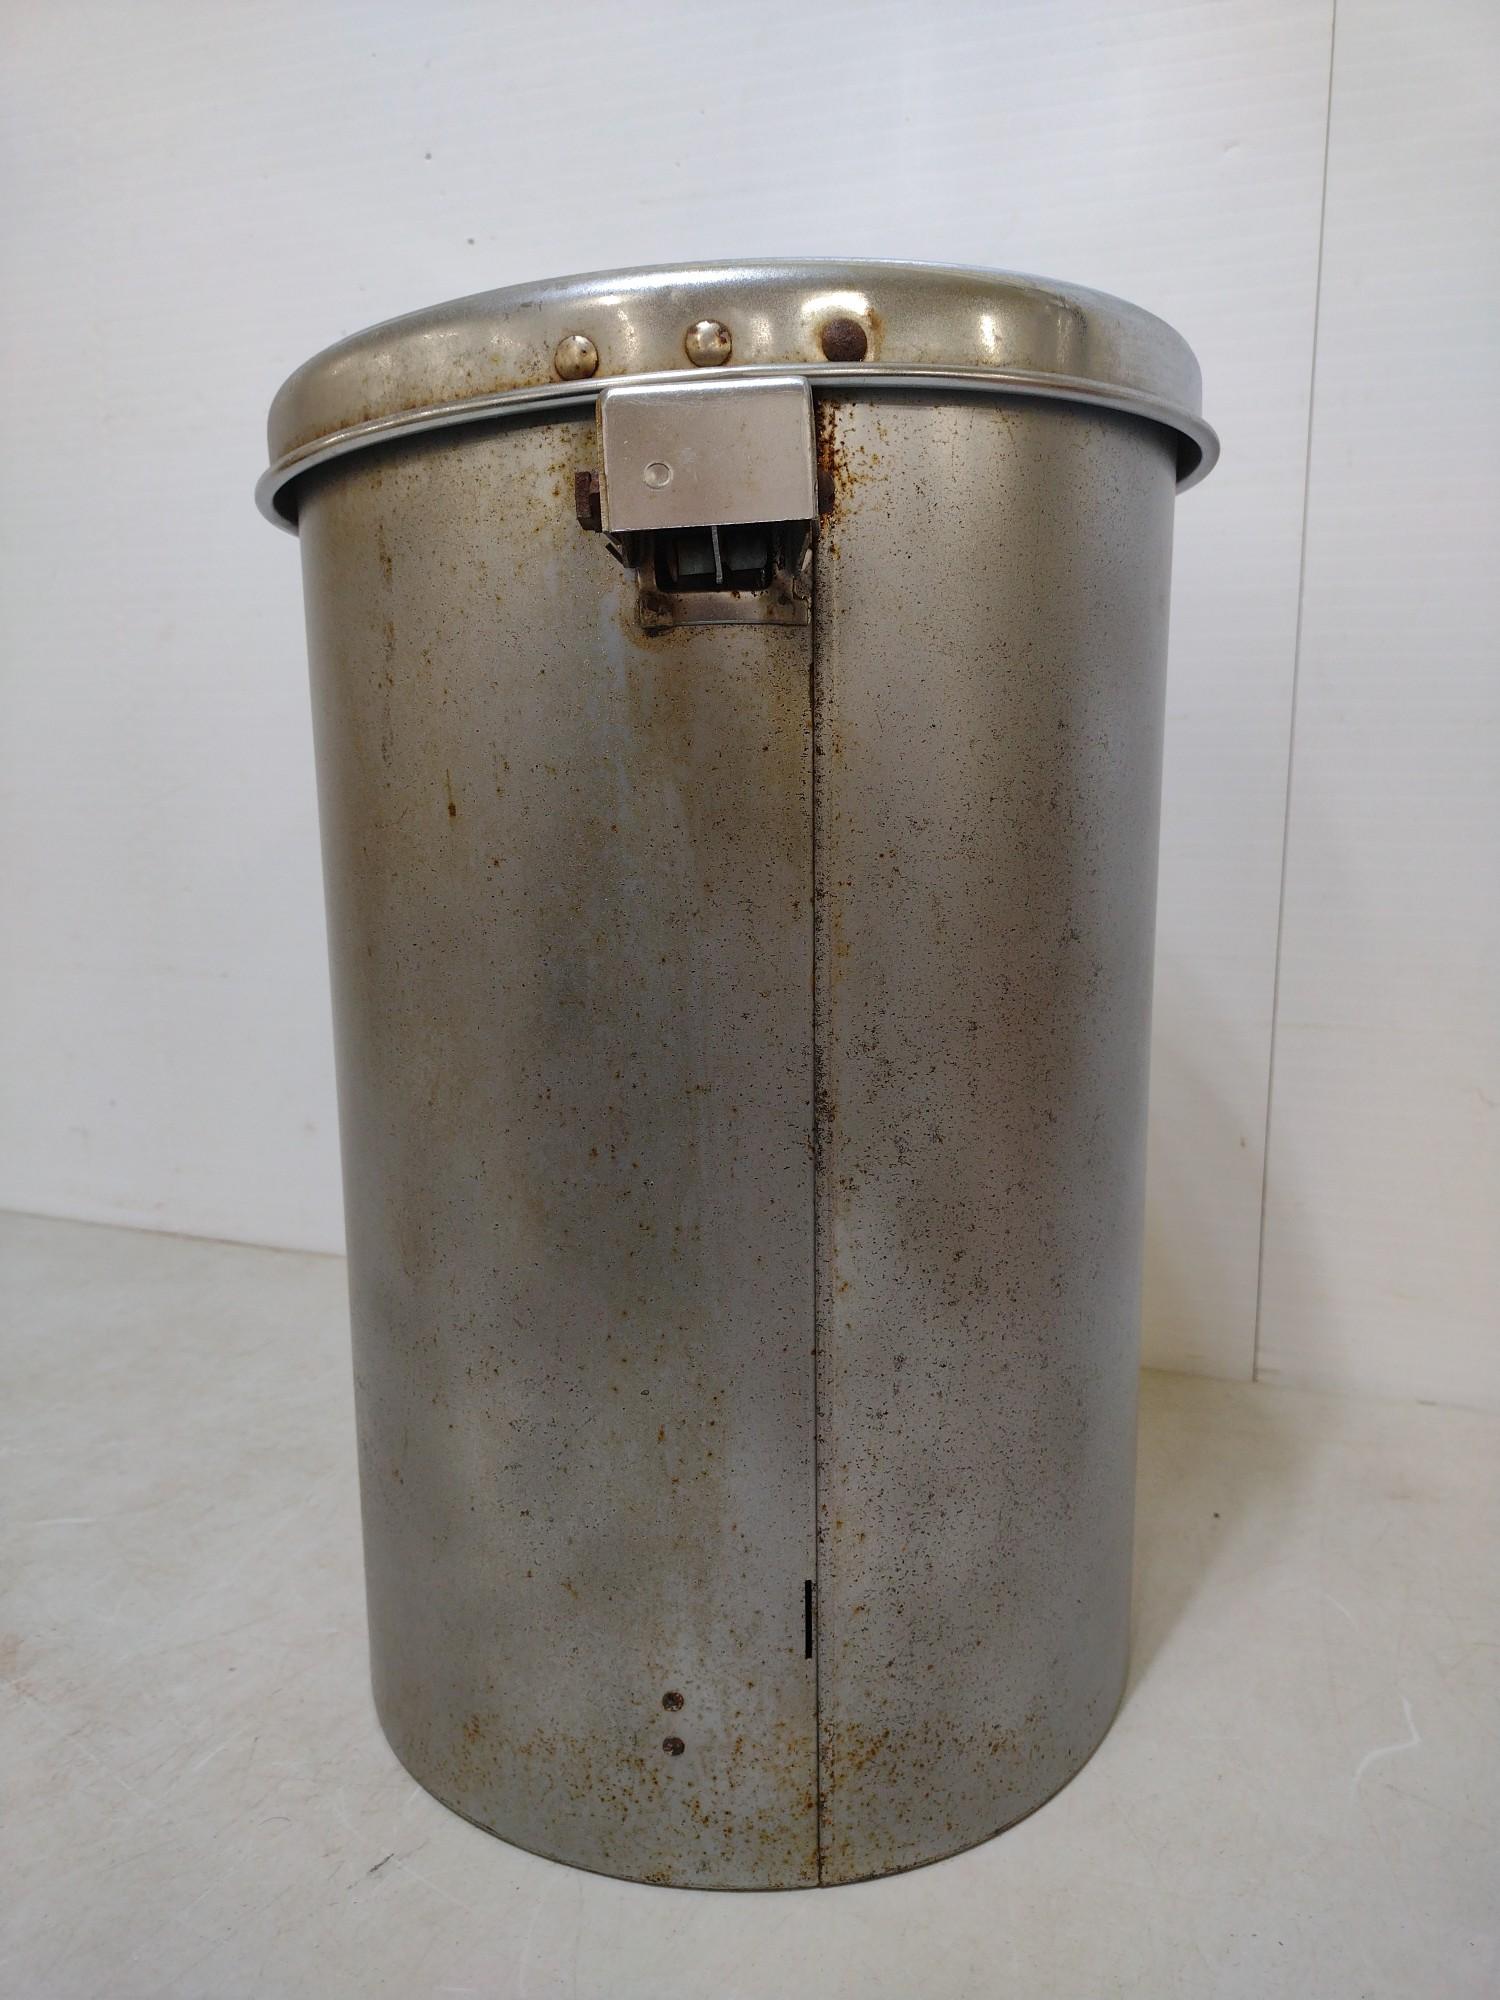 Beautycan Foot Operated Garbage Can.